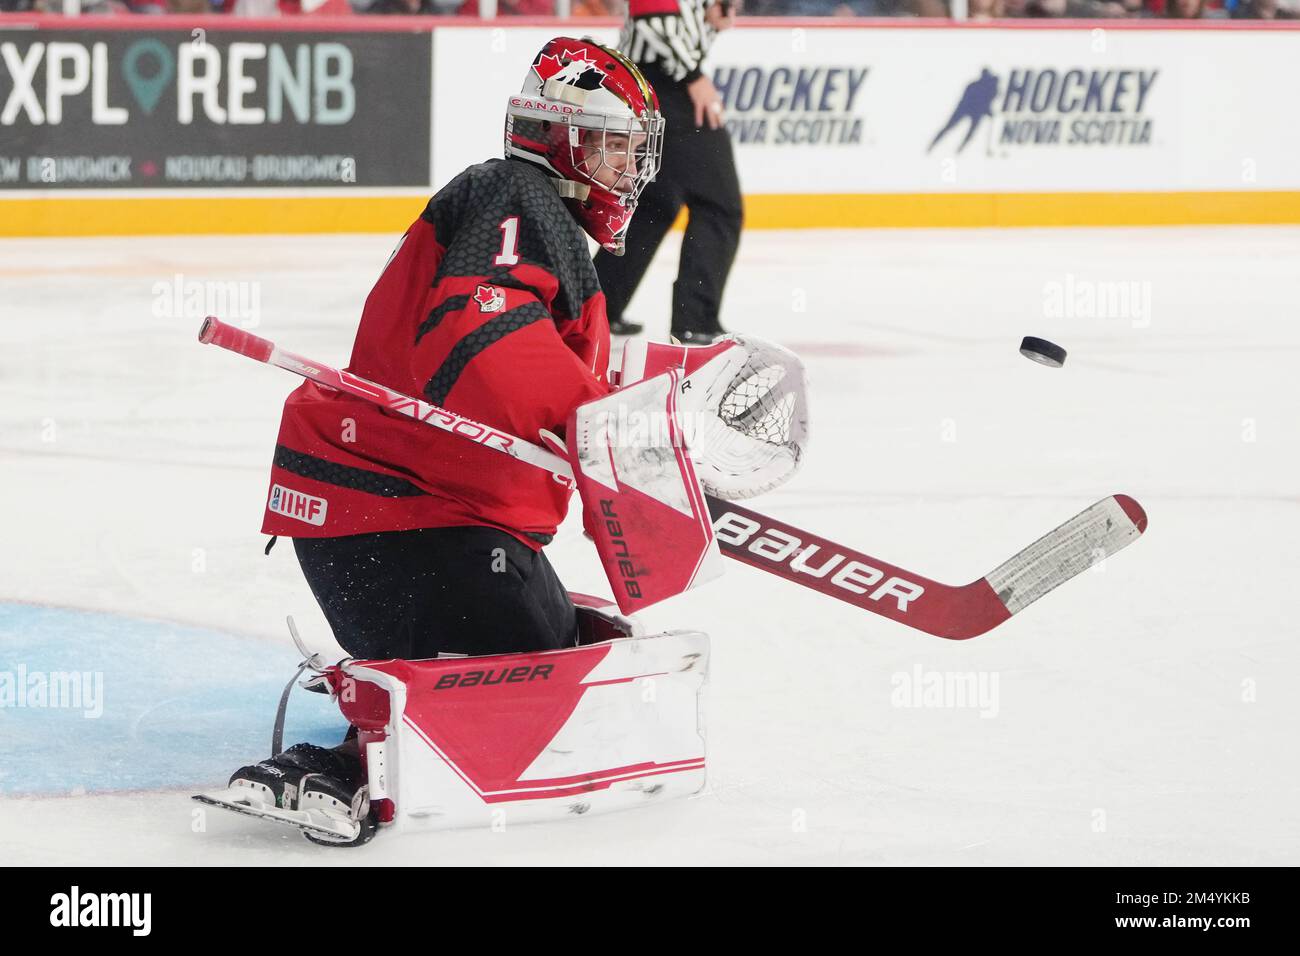 December 23, 2022, Halifax, NS, Canada Canada goaltender Thomas Milic makes a save during first period IIHF World Junior Hockey Championship pre-tournament hockey action against Finland in Halifax on Friday, December 23,